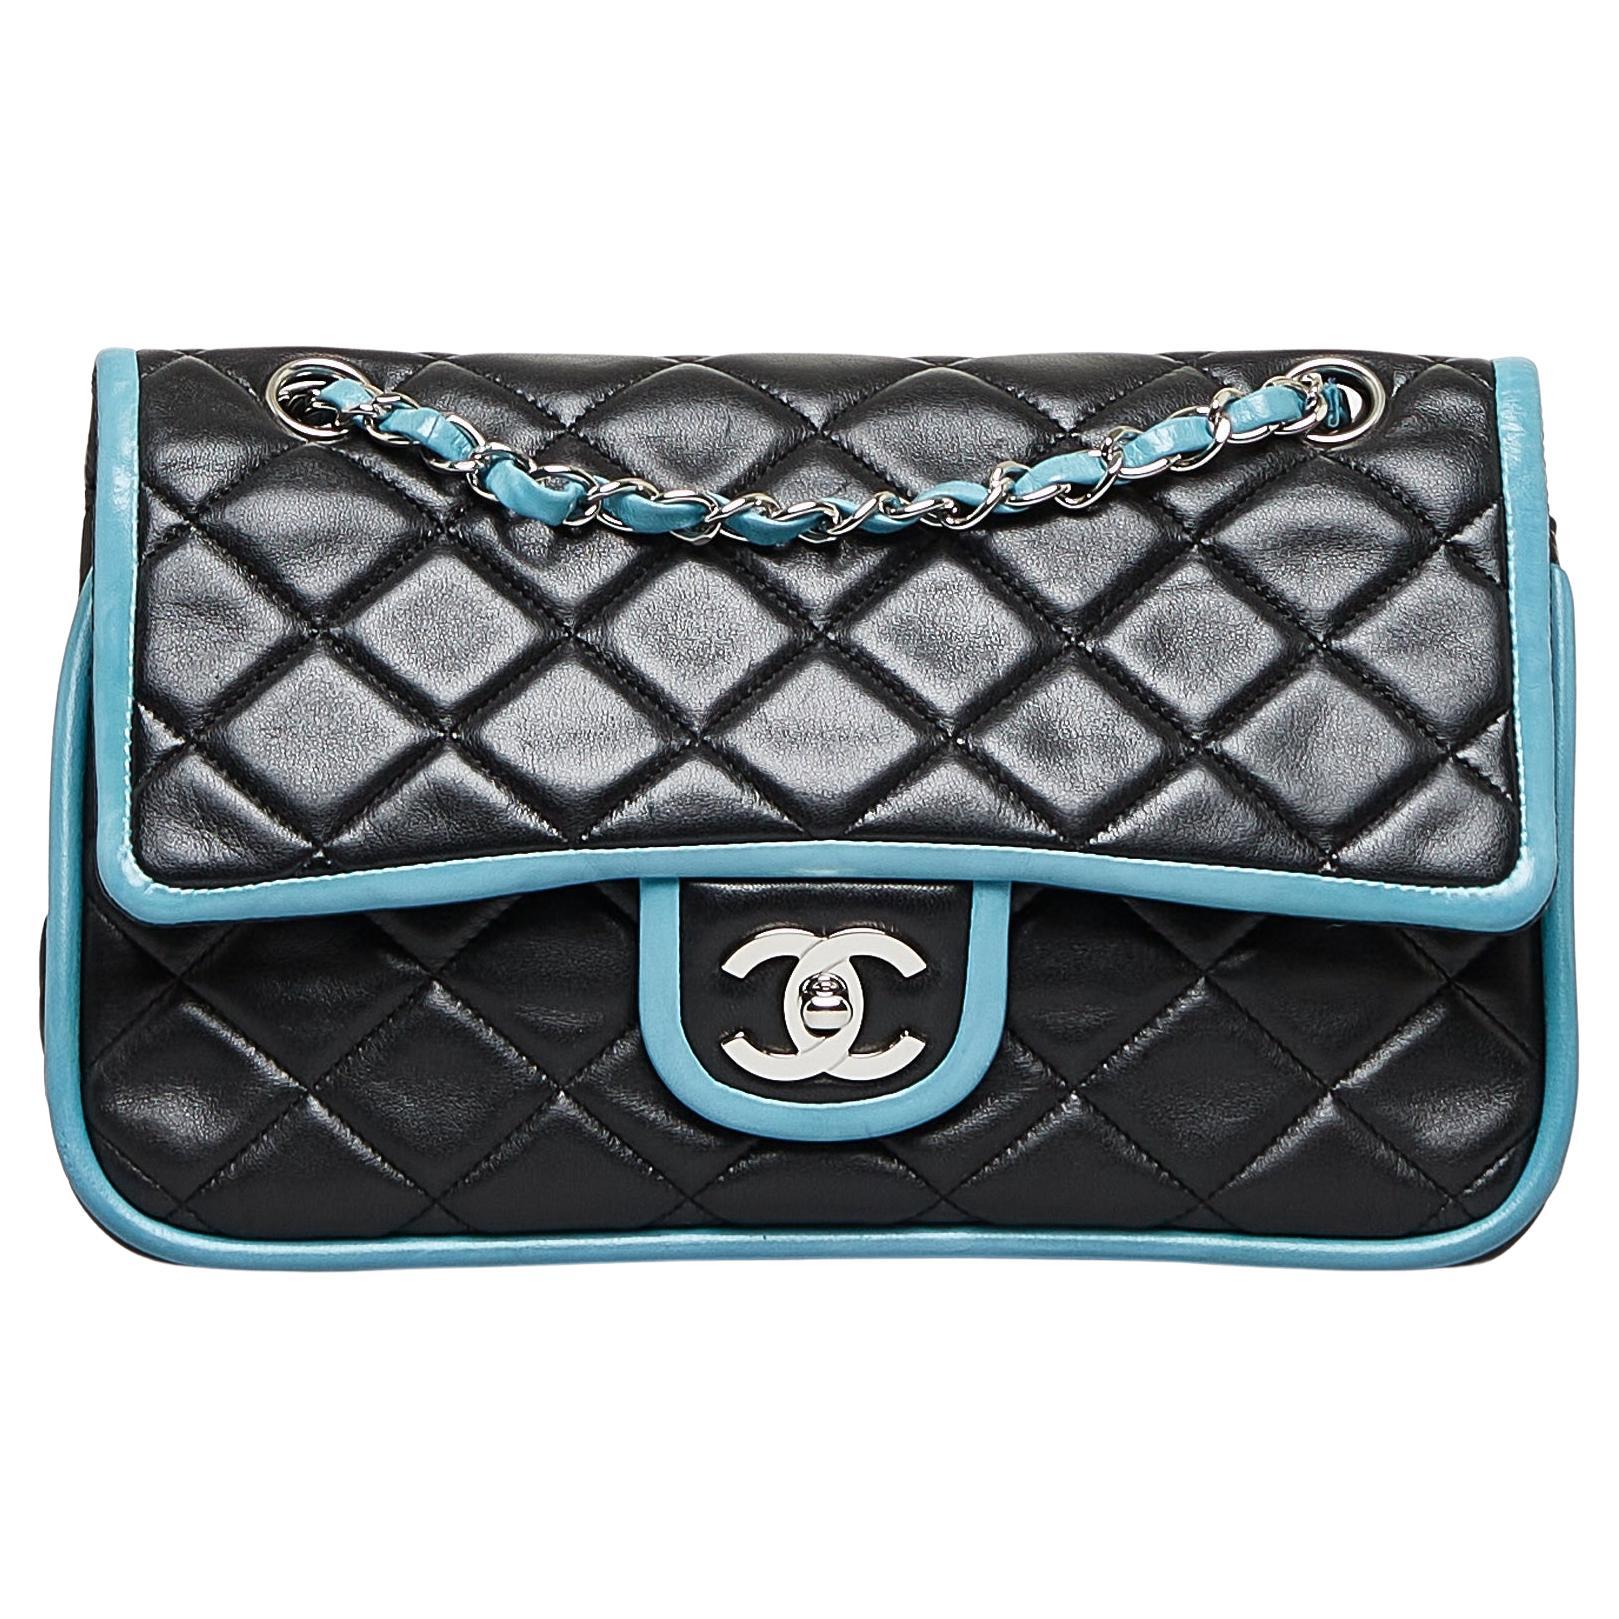 Women's Chanel 2006 Medium Double Classic Flap in Black Lambskin Turquoise Piping Bag For Sale